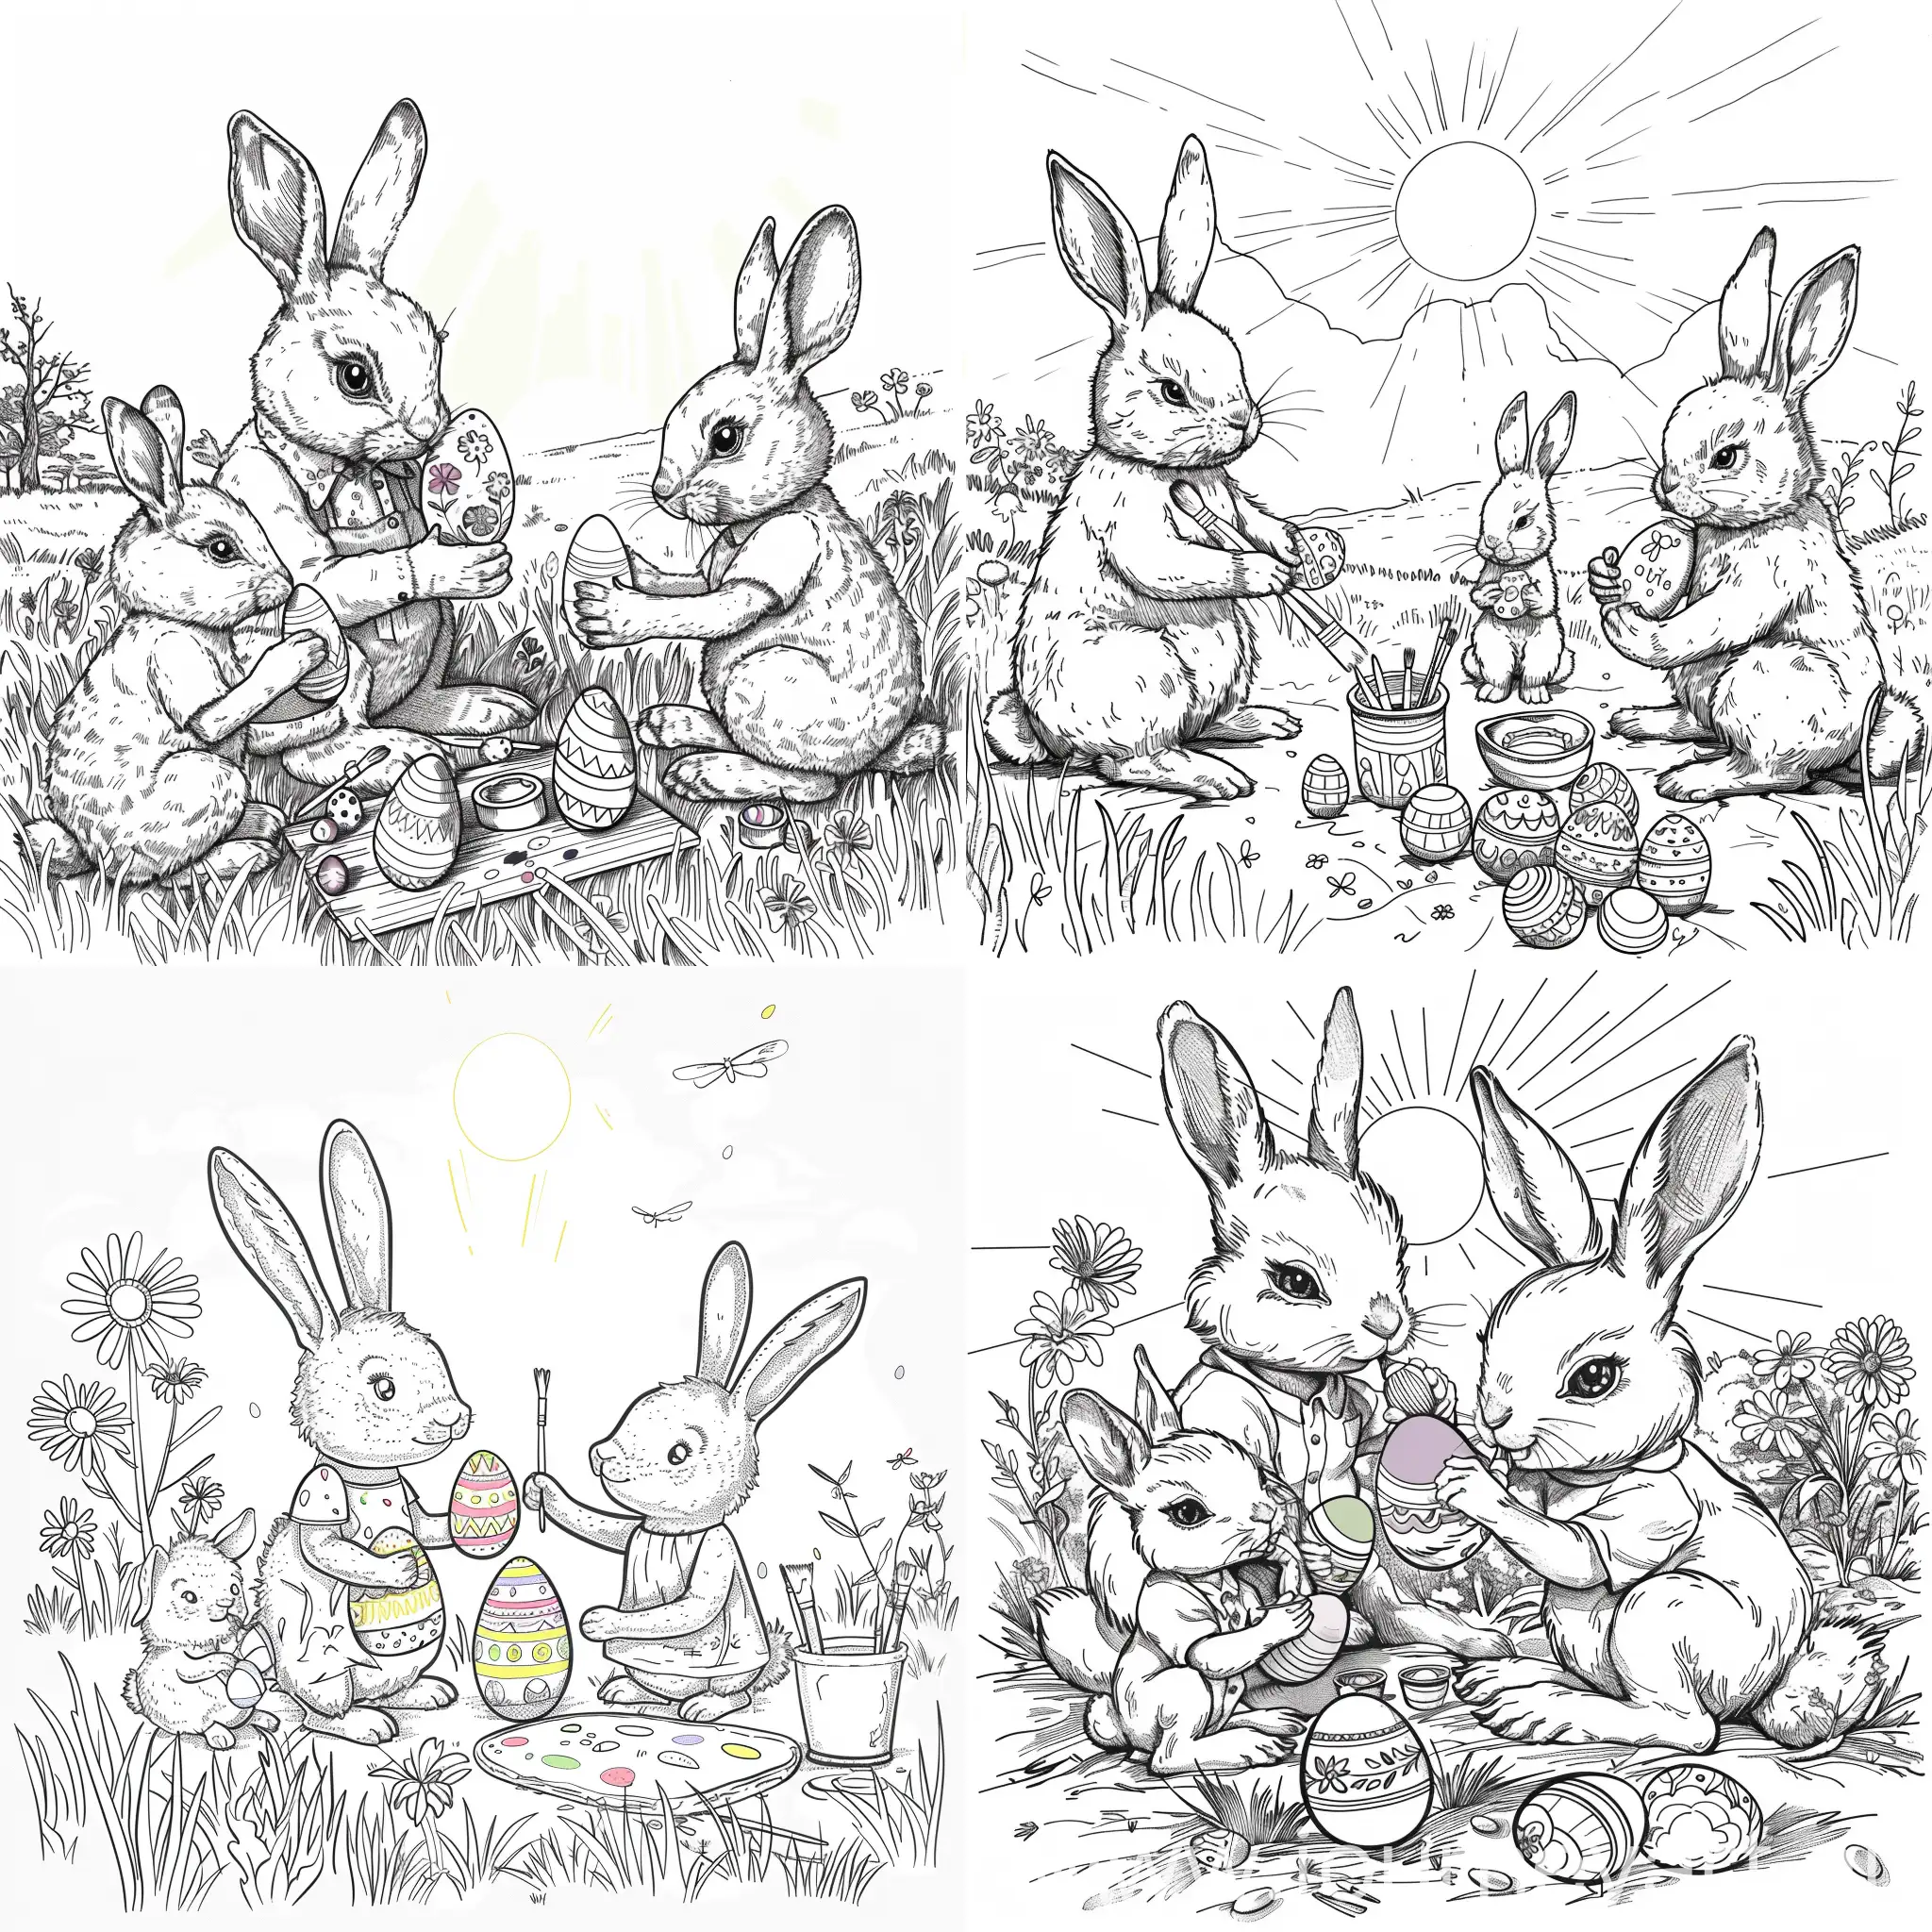 A coloring page of A bunny family painting colorful Easter eggs together in a sunlit meadow